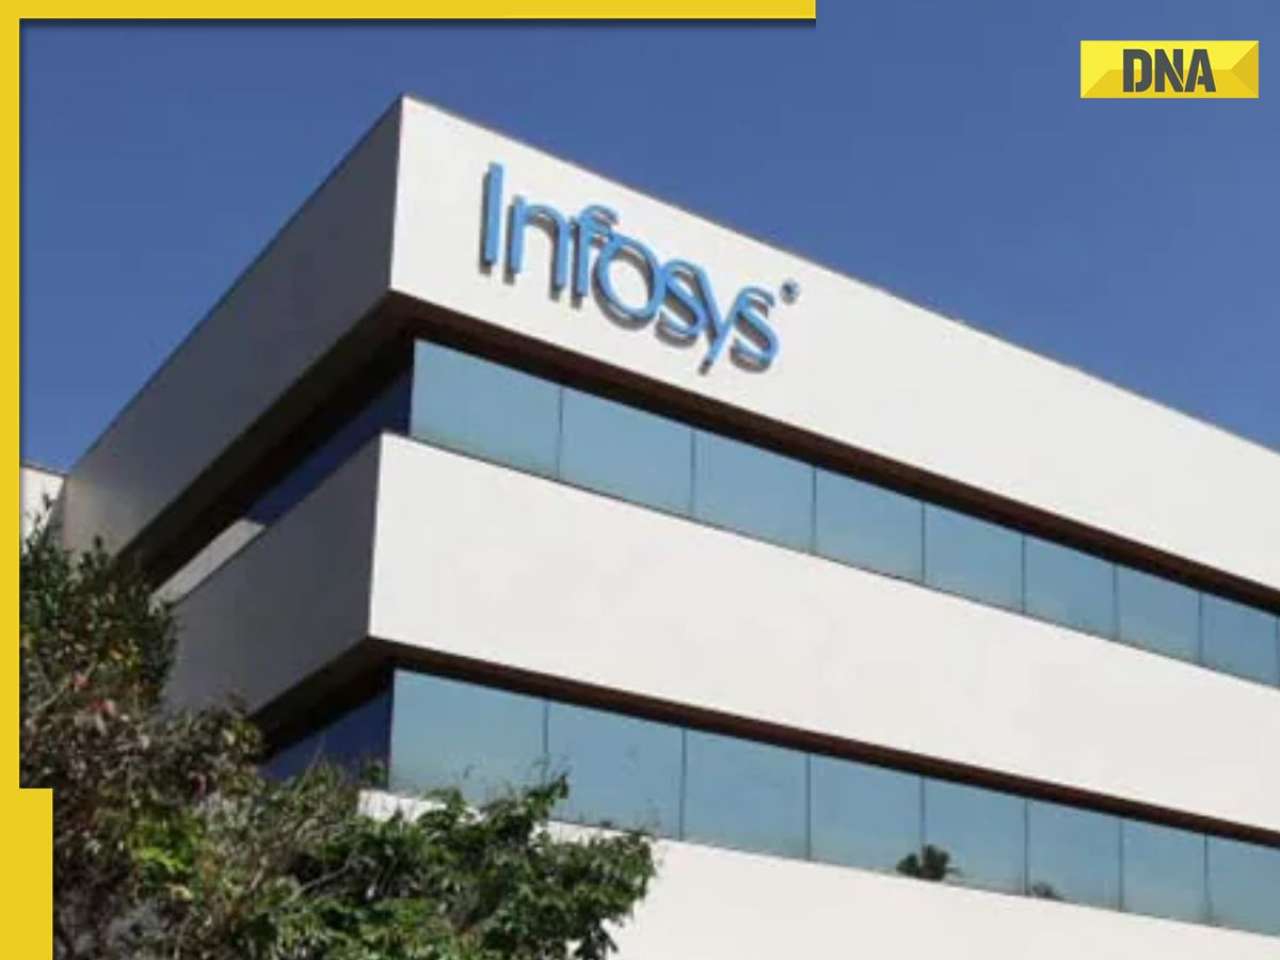 Narayana Murthy's Infosys Q4 profit jumps 30% to Rs 7969 crore, revenue increases by...